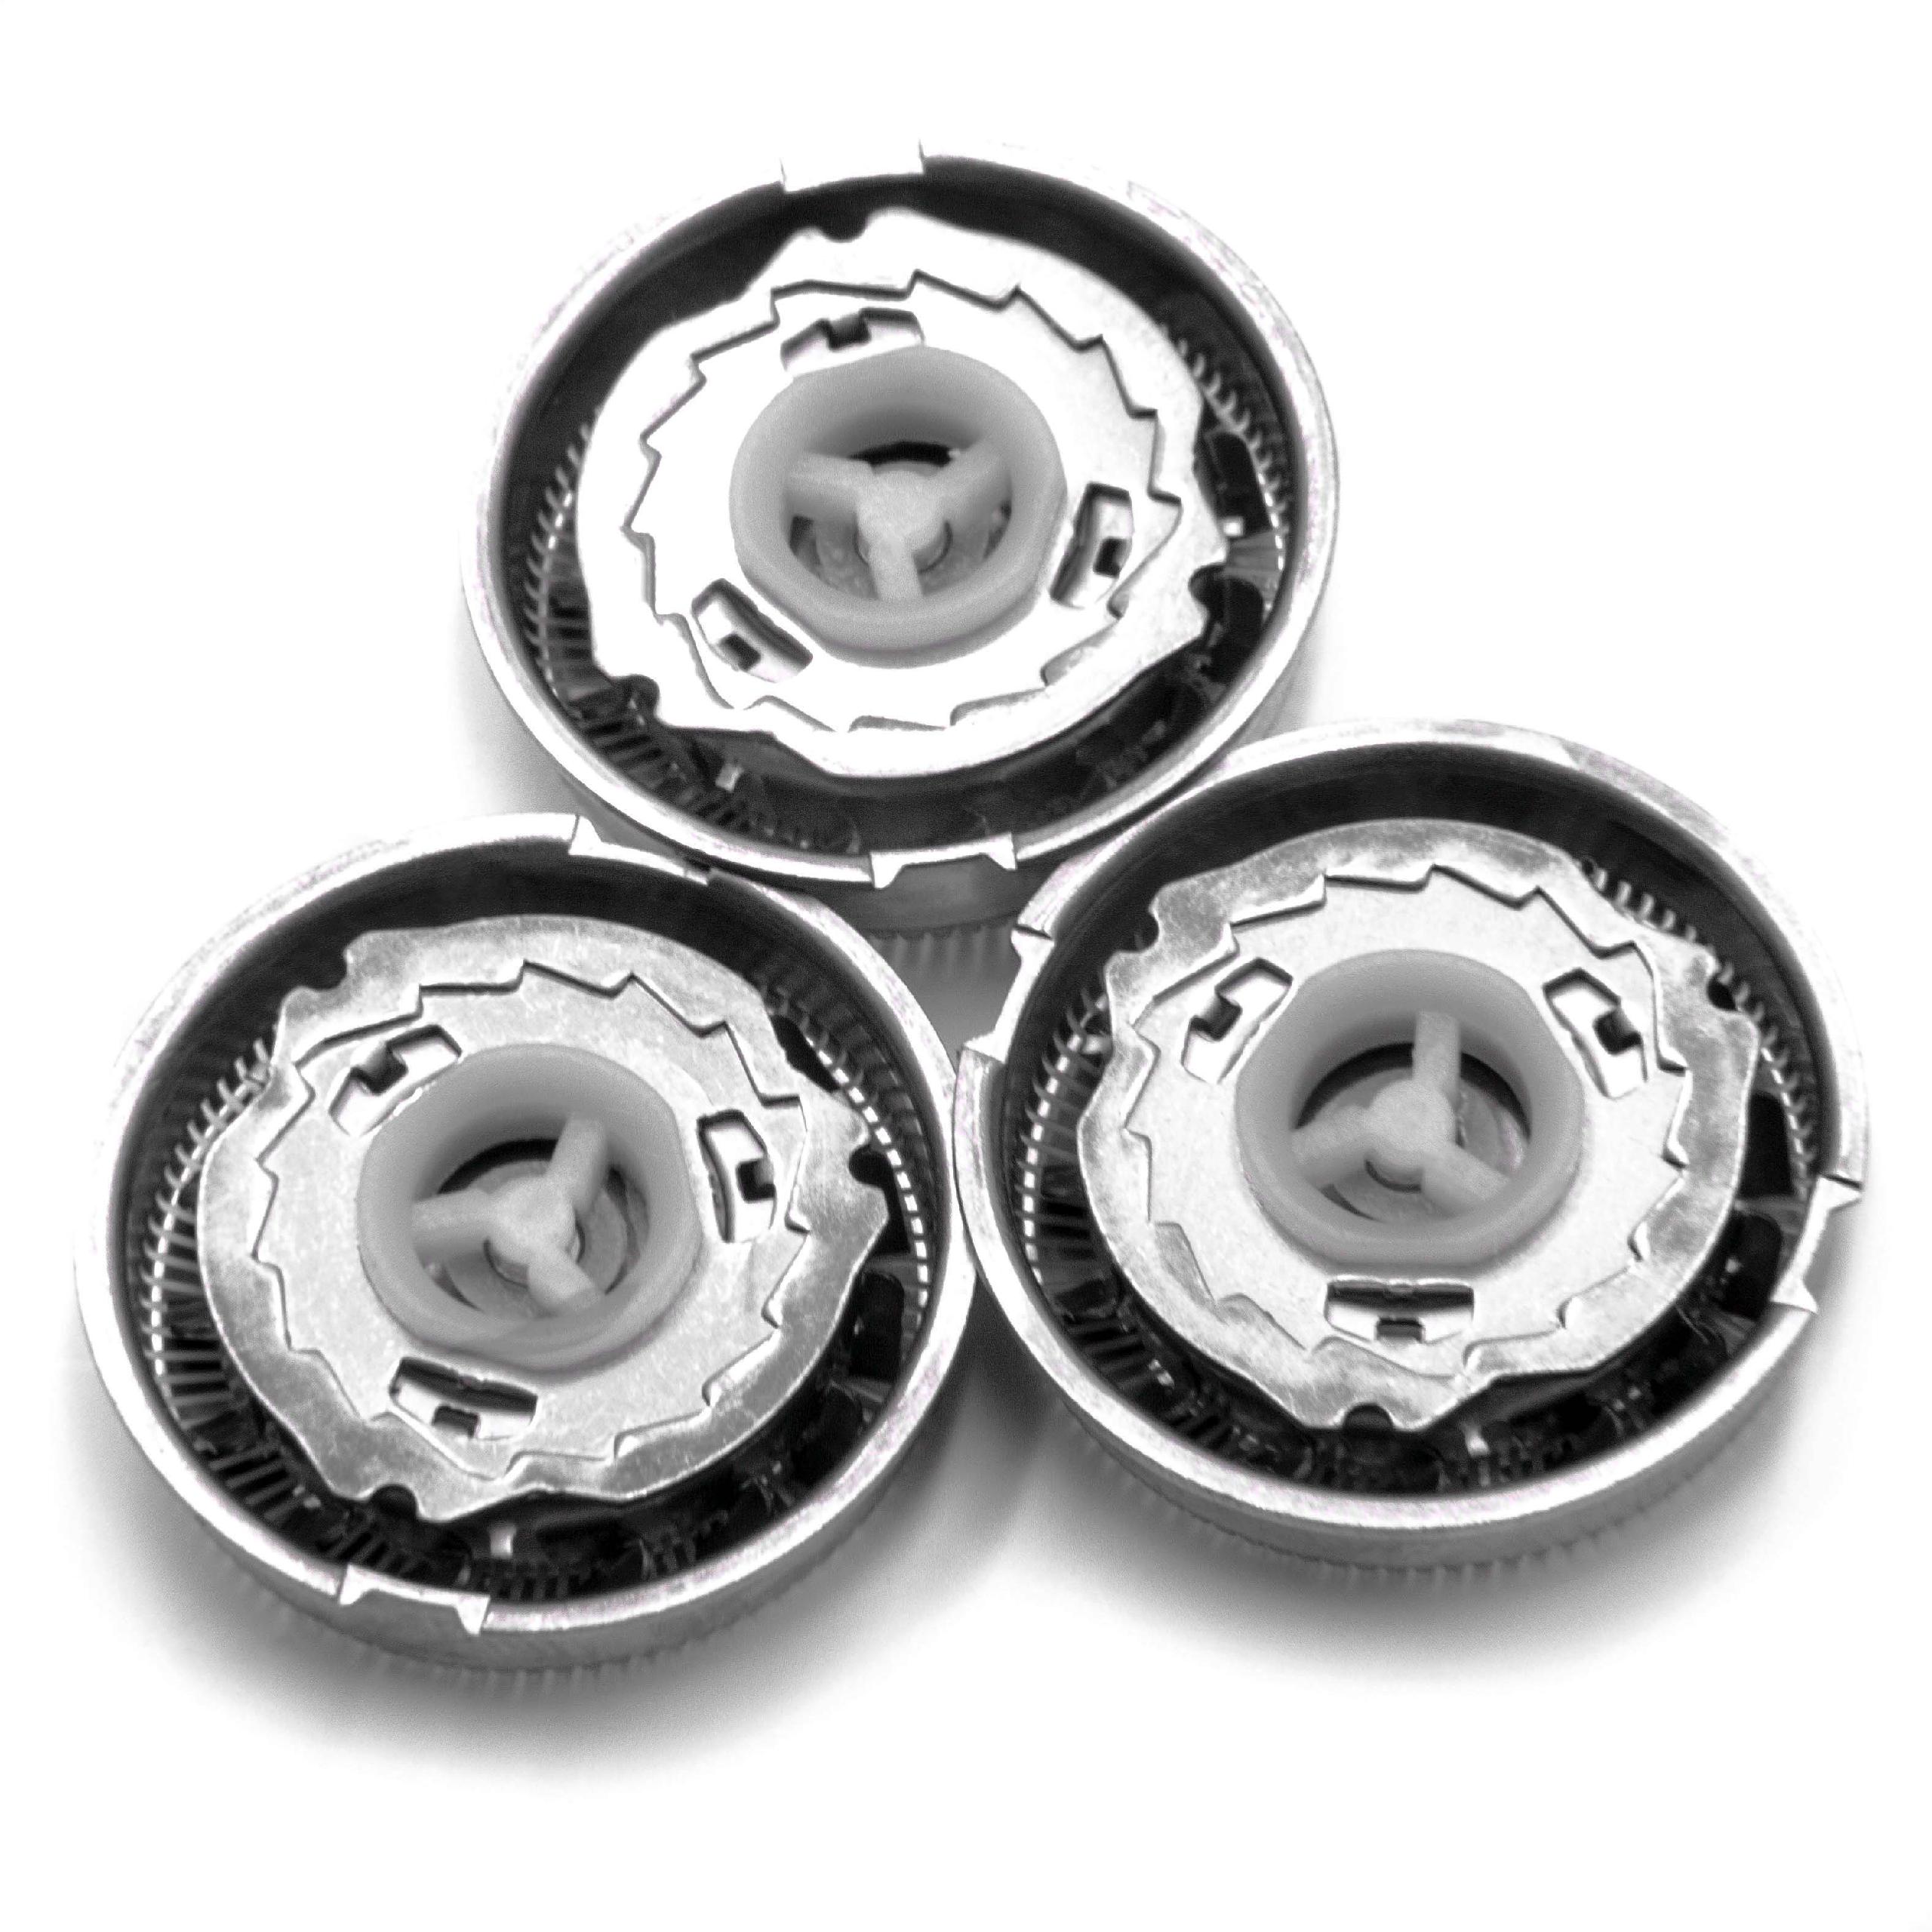 3x shaving head as Replacement for Philips HQ5 for Philips Shaver - Stainless Steel